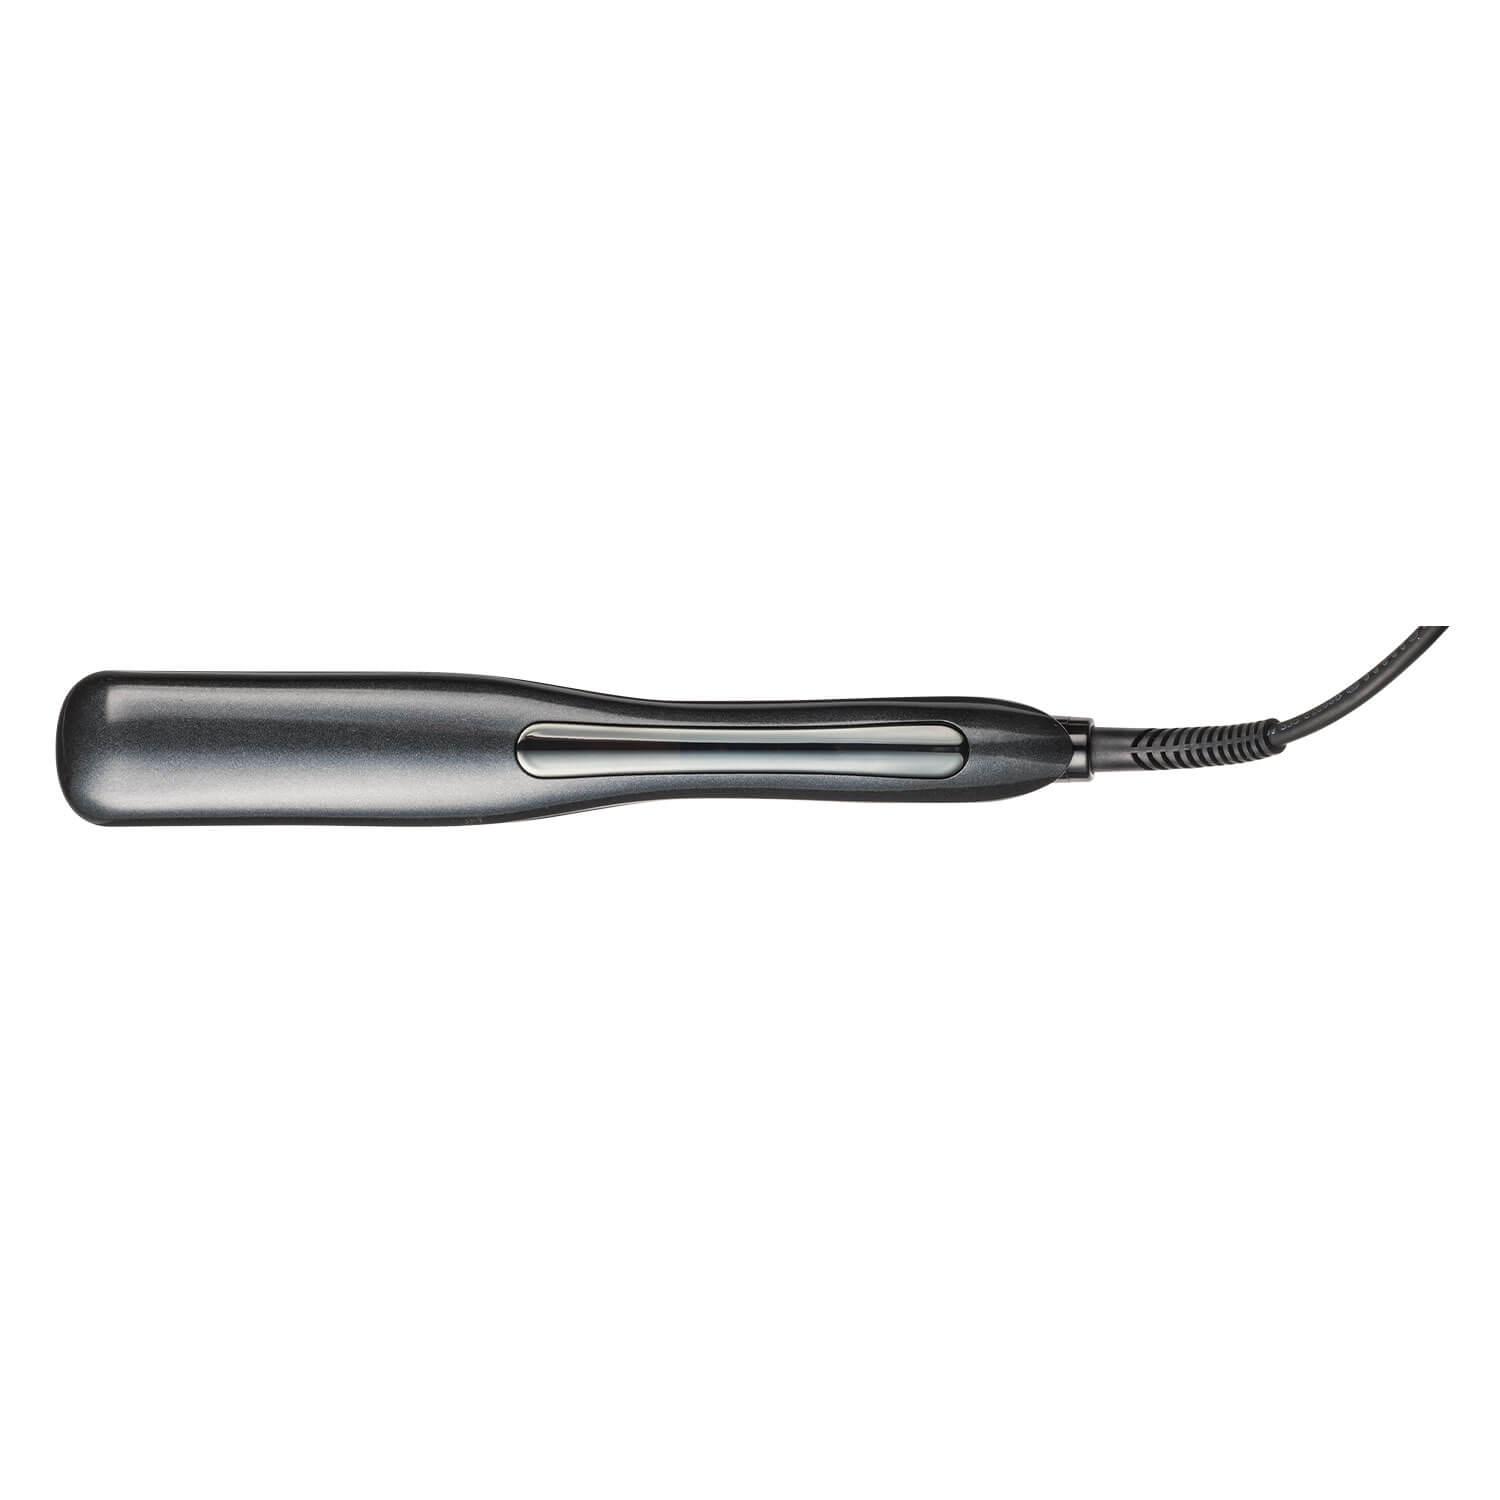 HH Simonsen Electricals - ROD Curling Iron vs6 Crimping